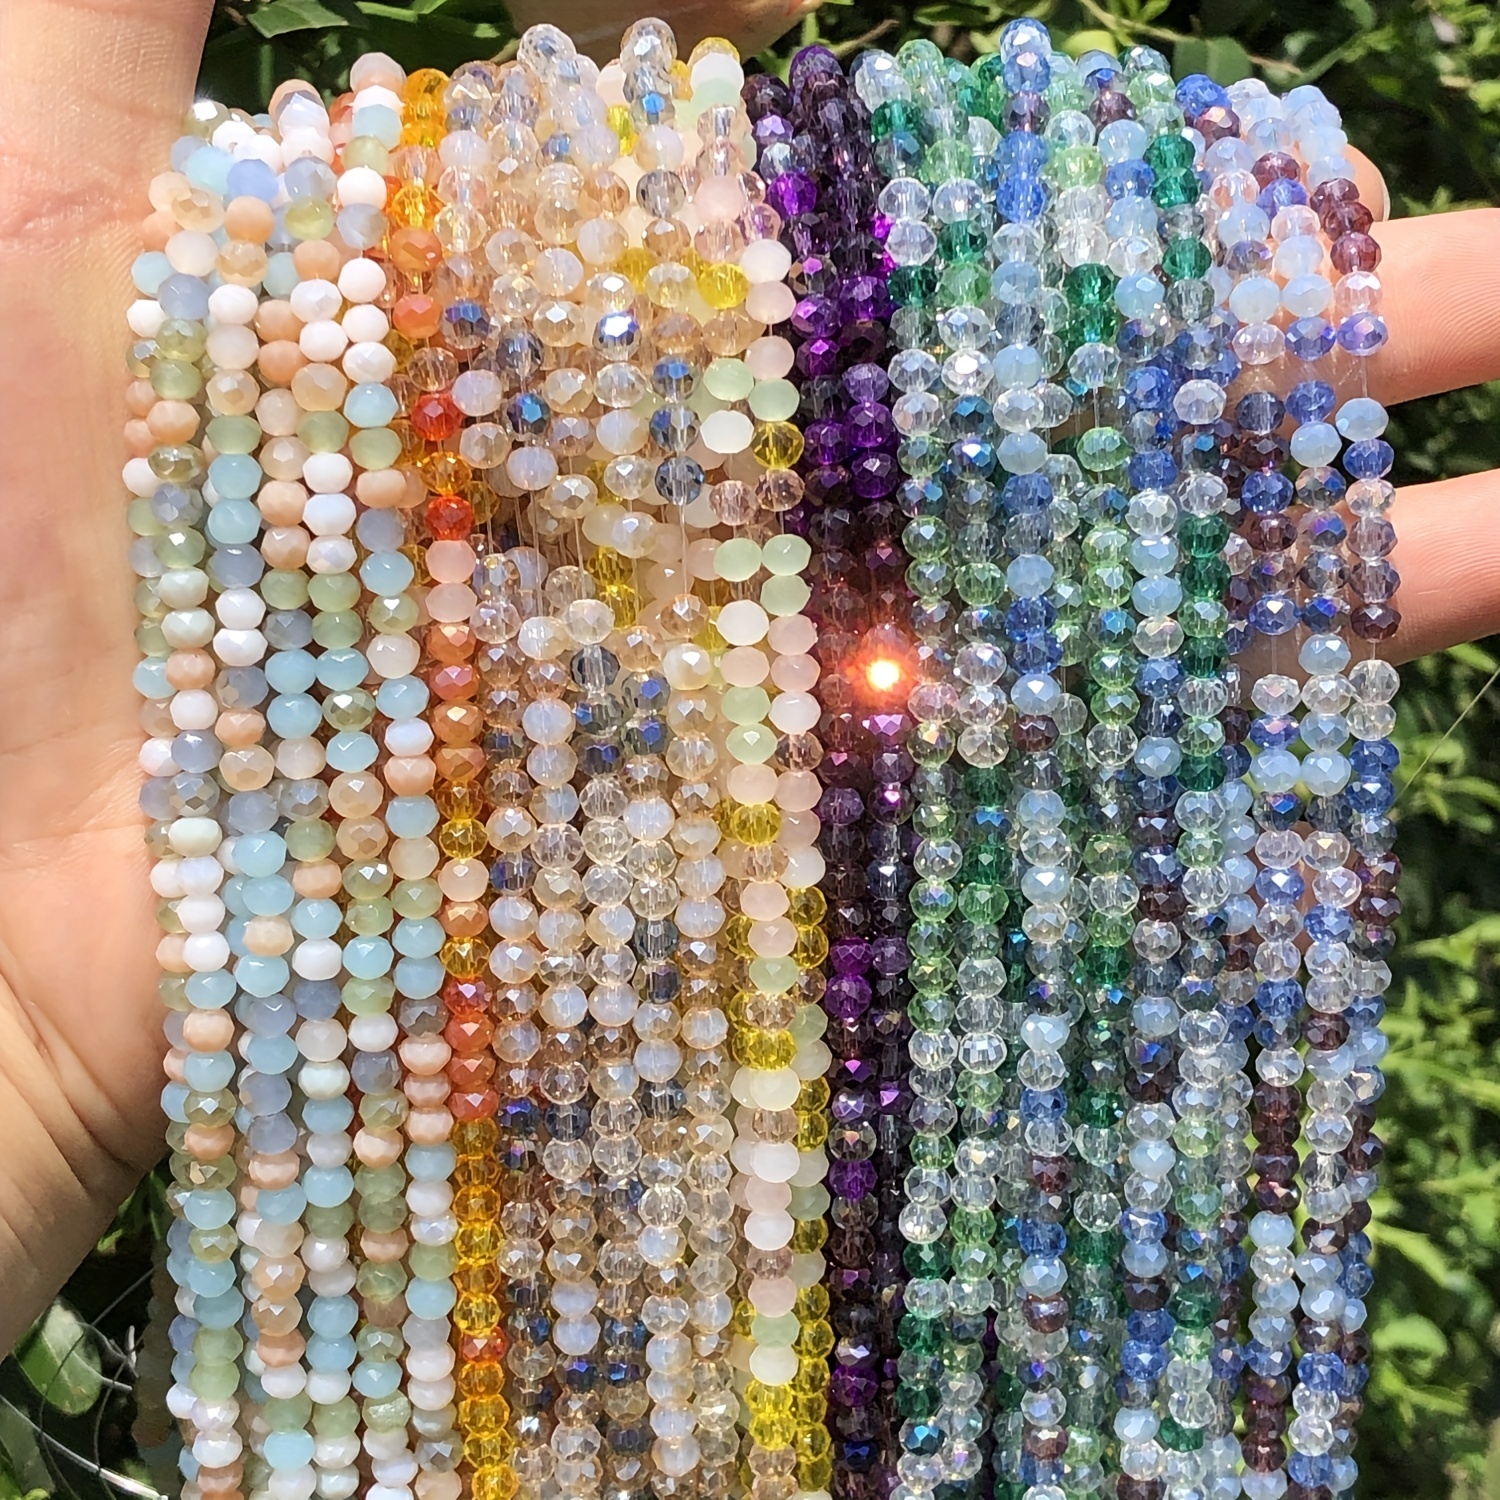 1mm/2mm/4mm/6mm/8mm Crystal Rondel Beads Faceted Glass Beads for Jewelry  Making DIY accessories Wholesale Lots Bulk - Price history & Review, AliExpress Seller - BOHOEVER Store